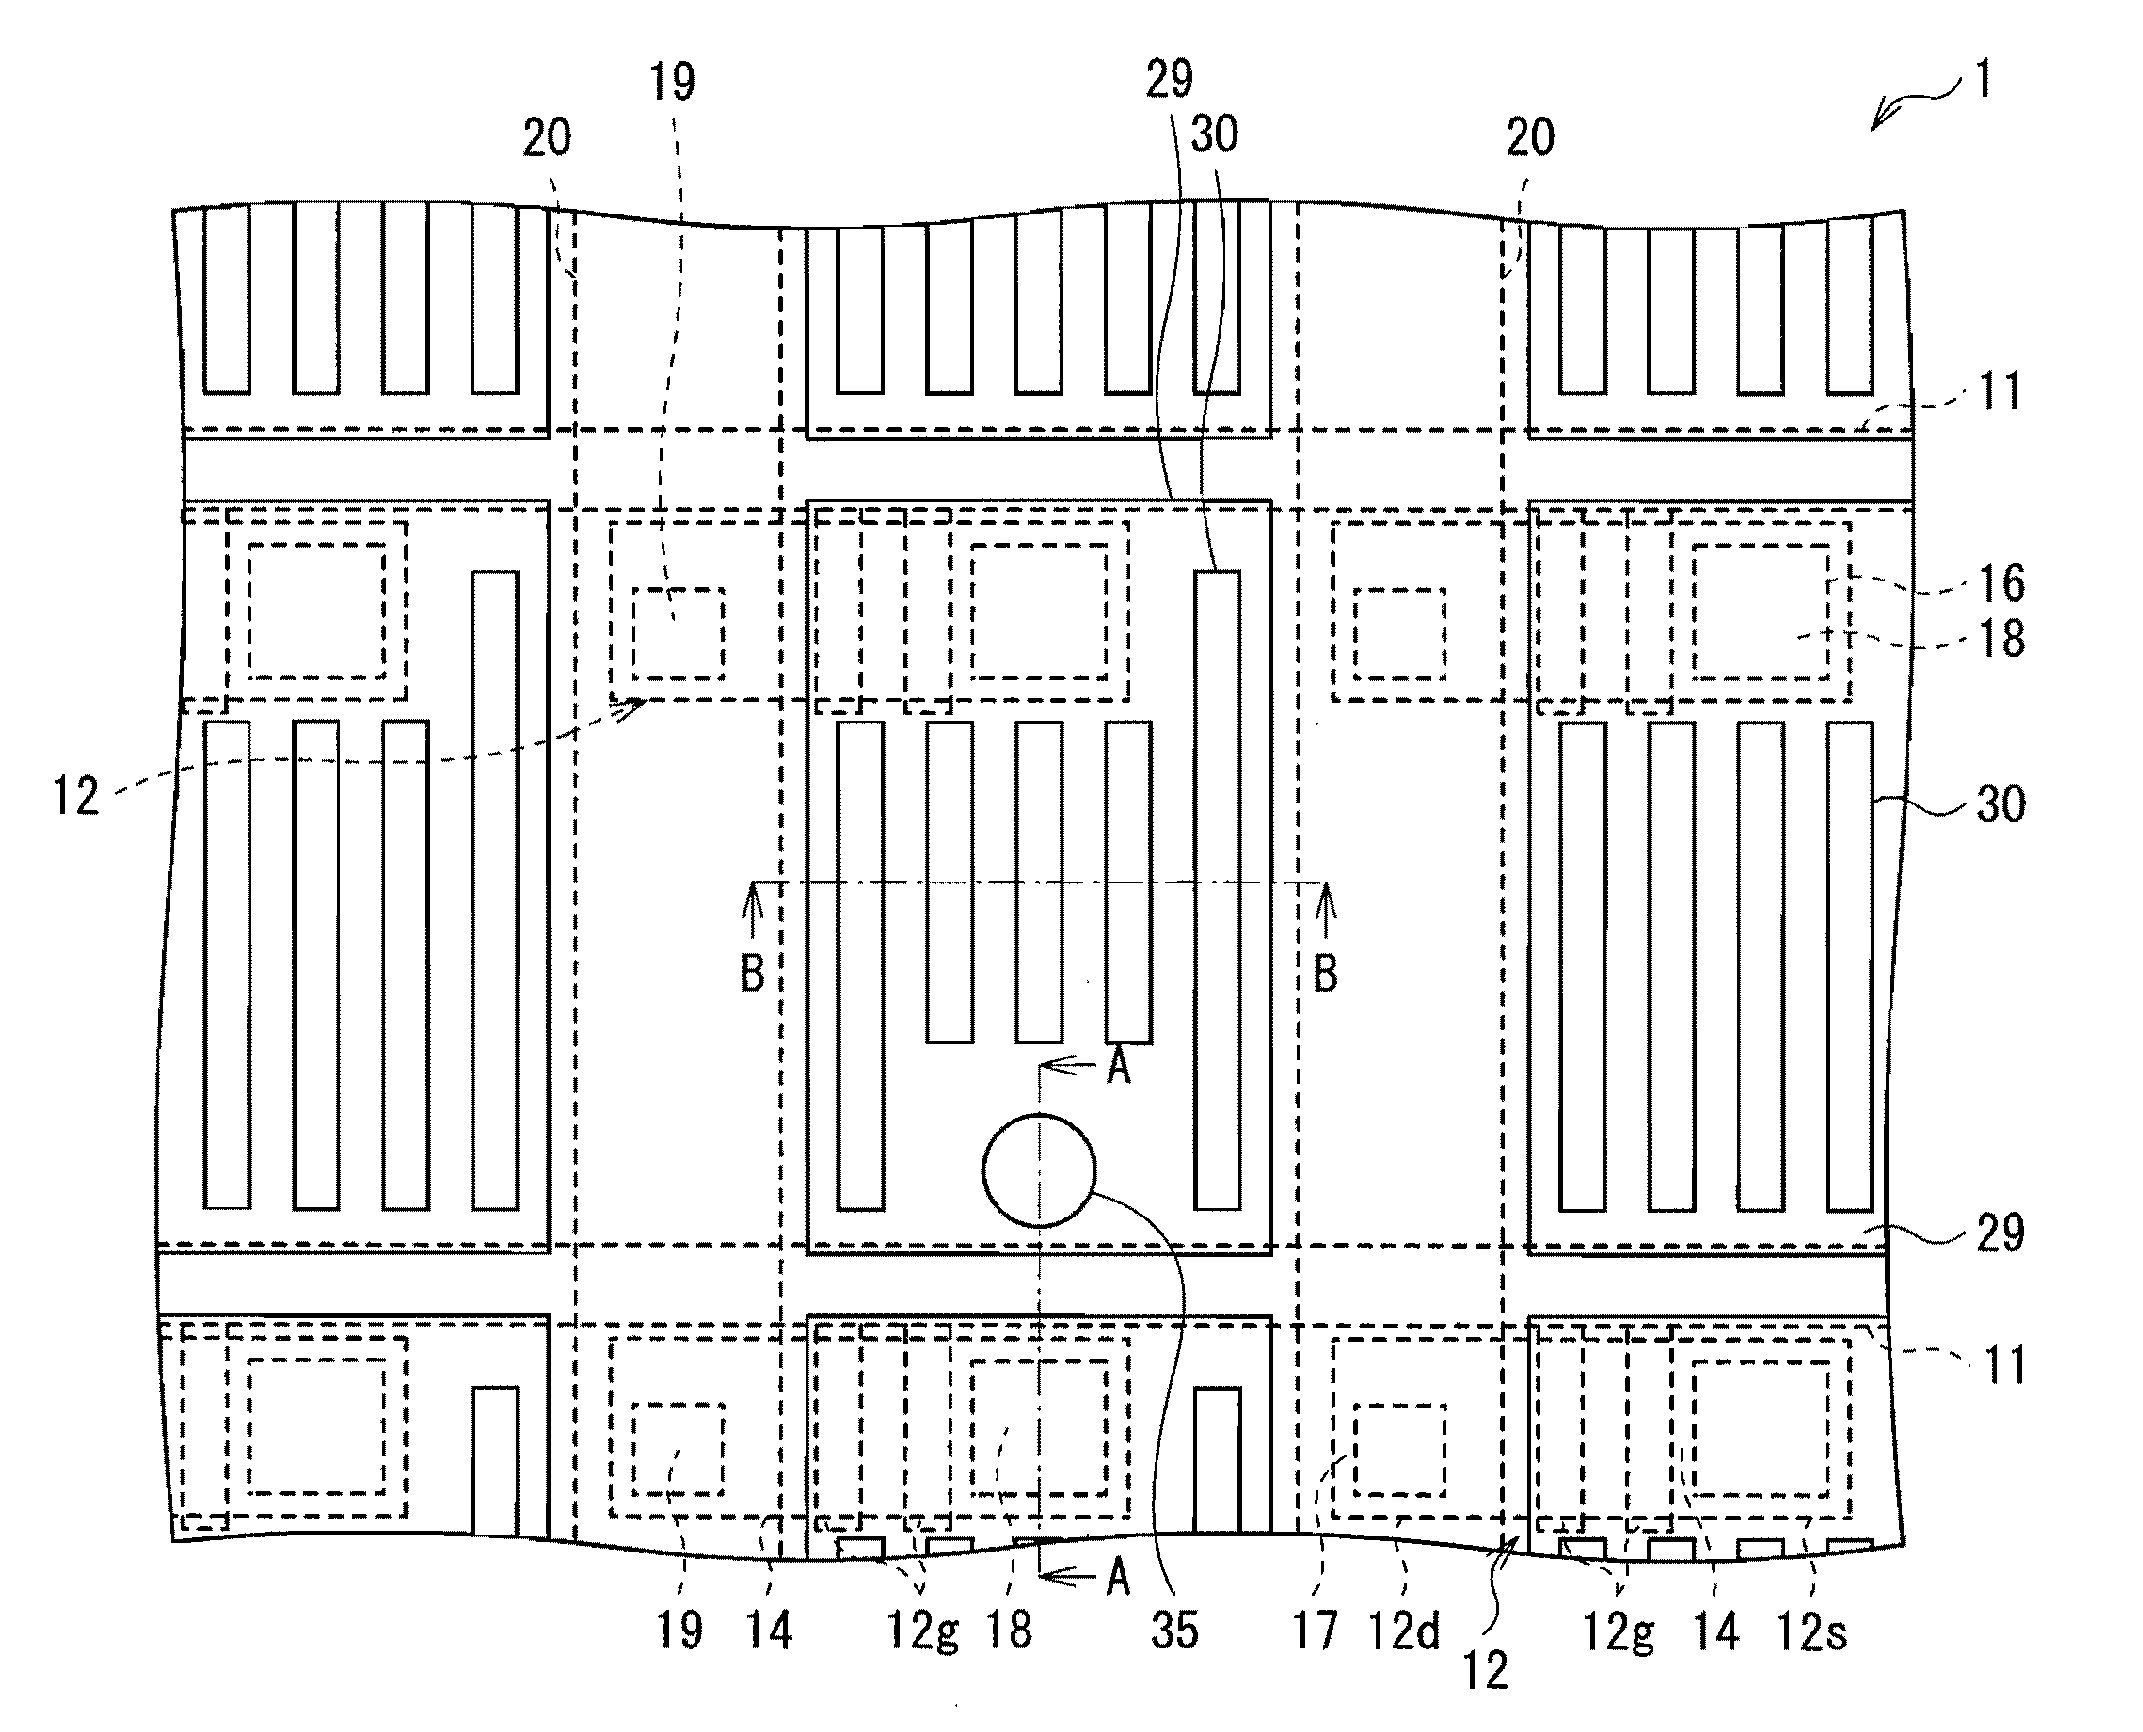 Liquid crystal display unit and electronic device